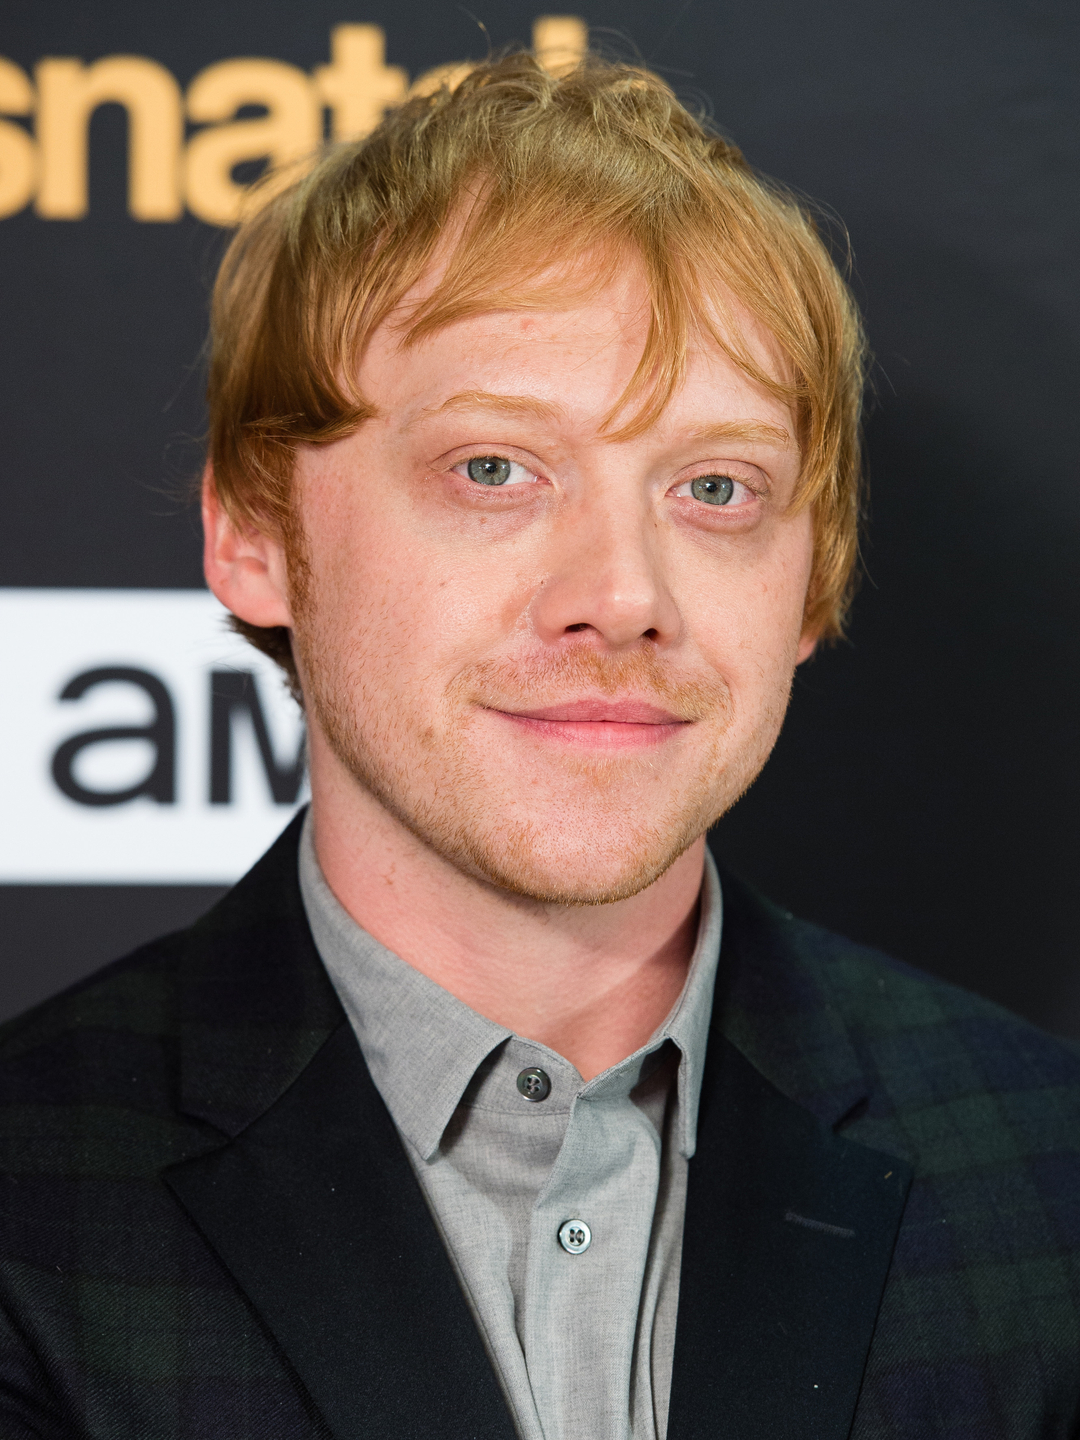 Rupert Grint how did he became famous